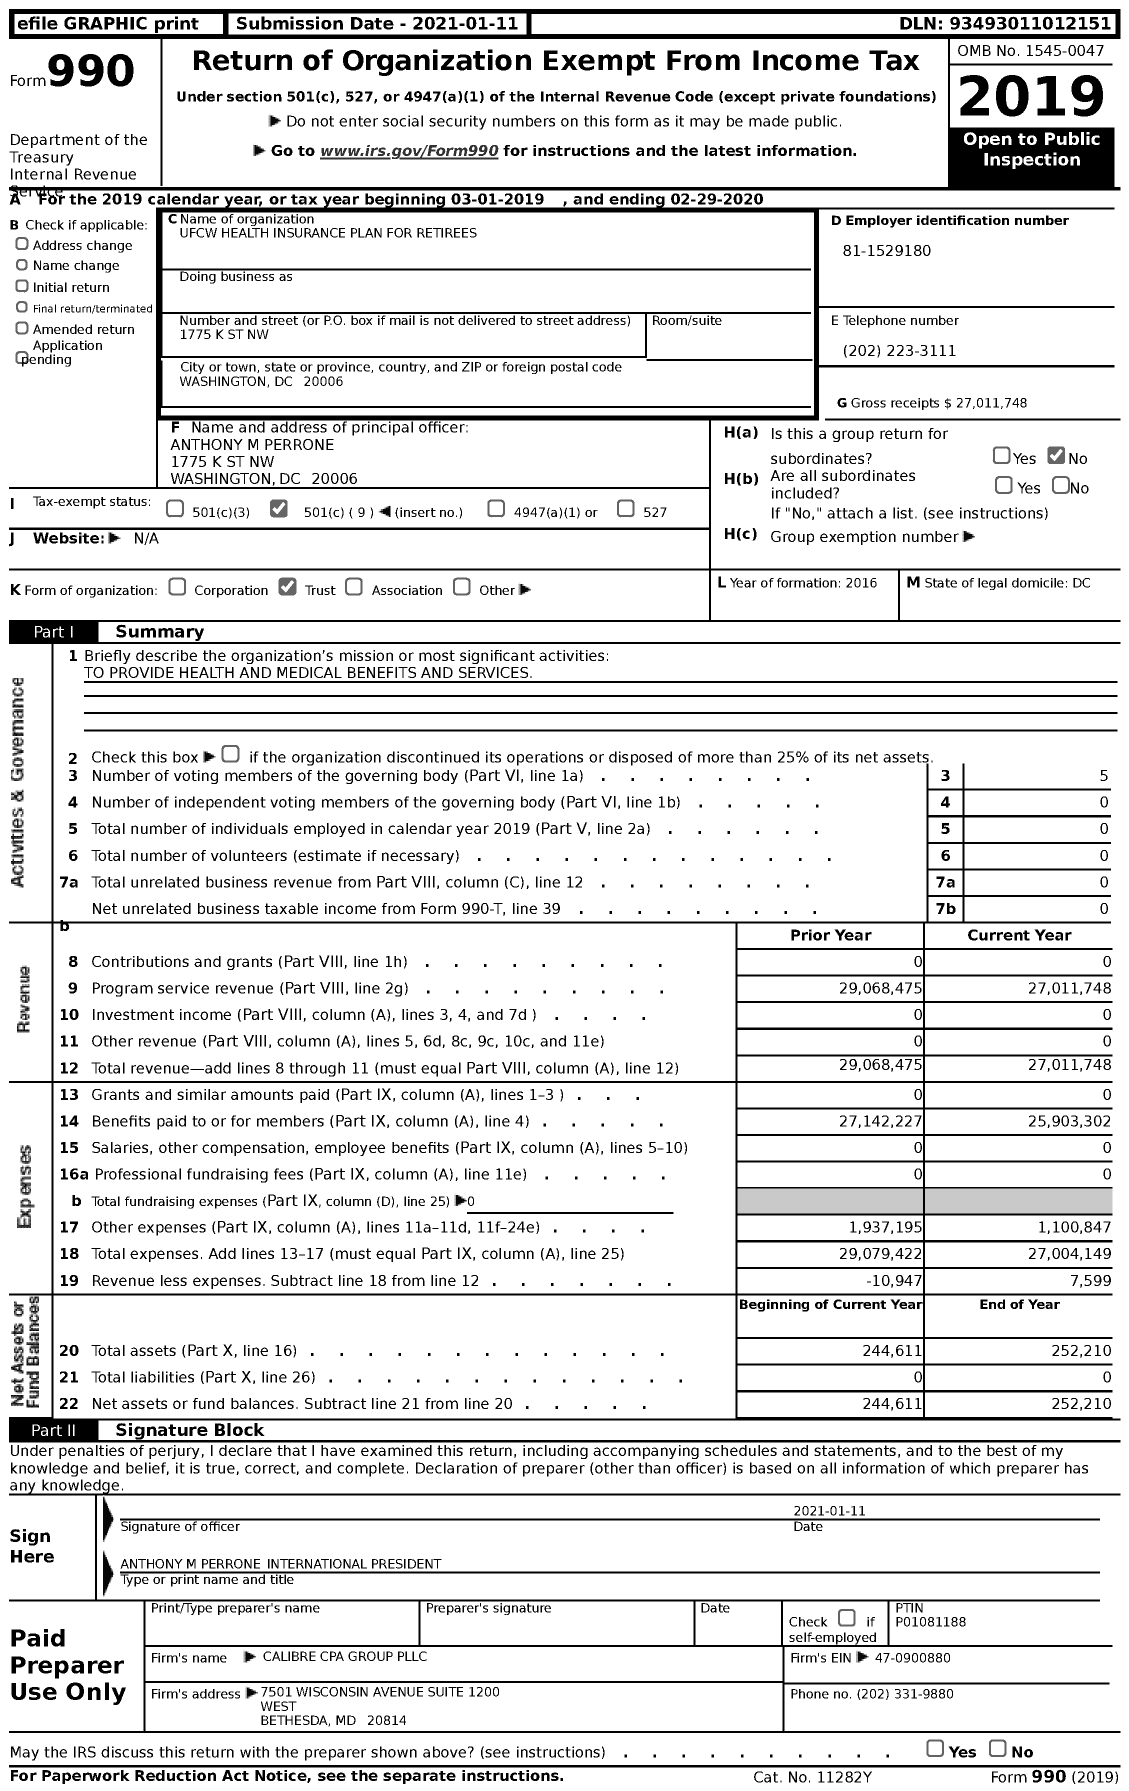 Image of first page of 2019 Form 990 for Ufcw Health Insurance Plan for Retirees